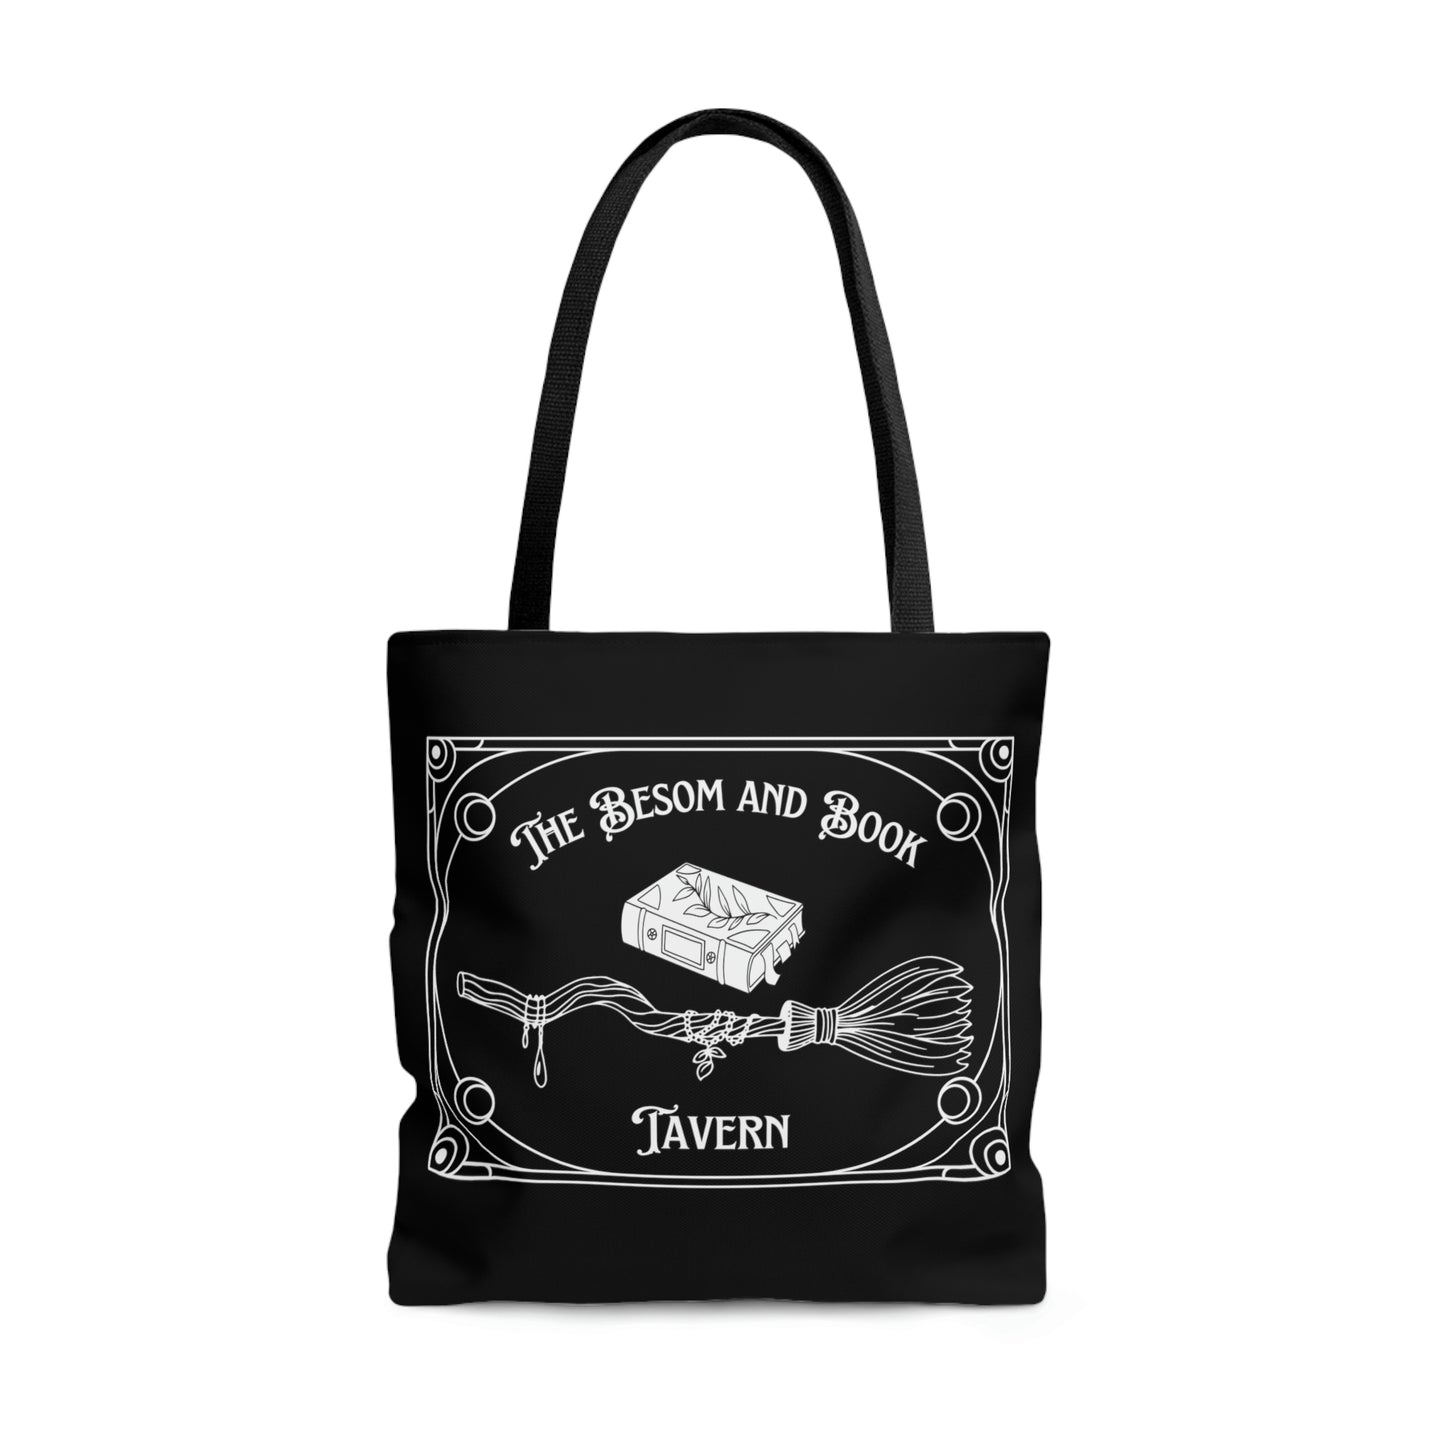 Besom and Book Tavern - Tote Bag